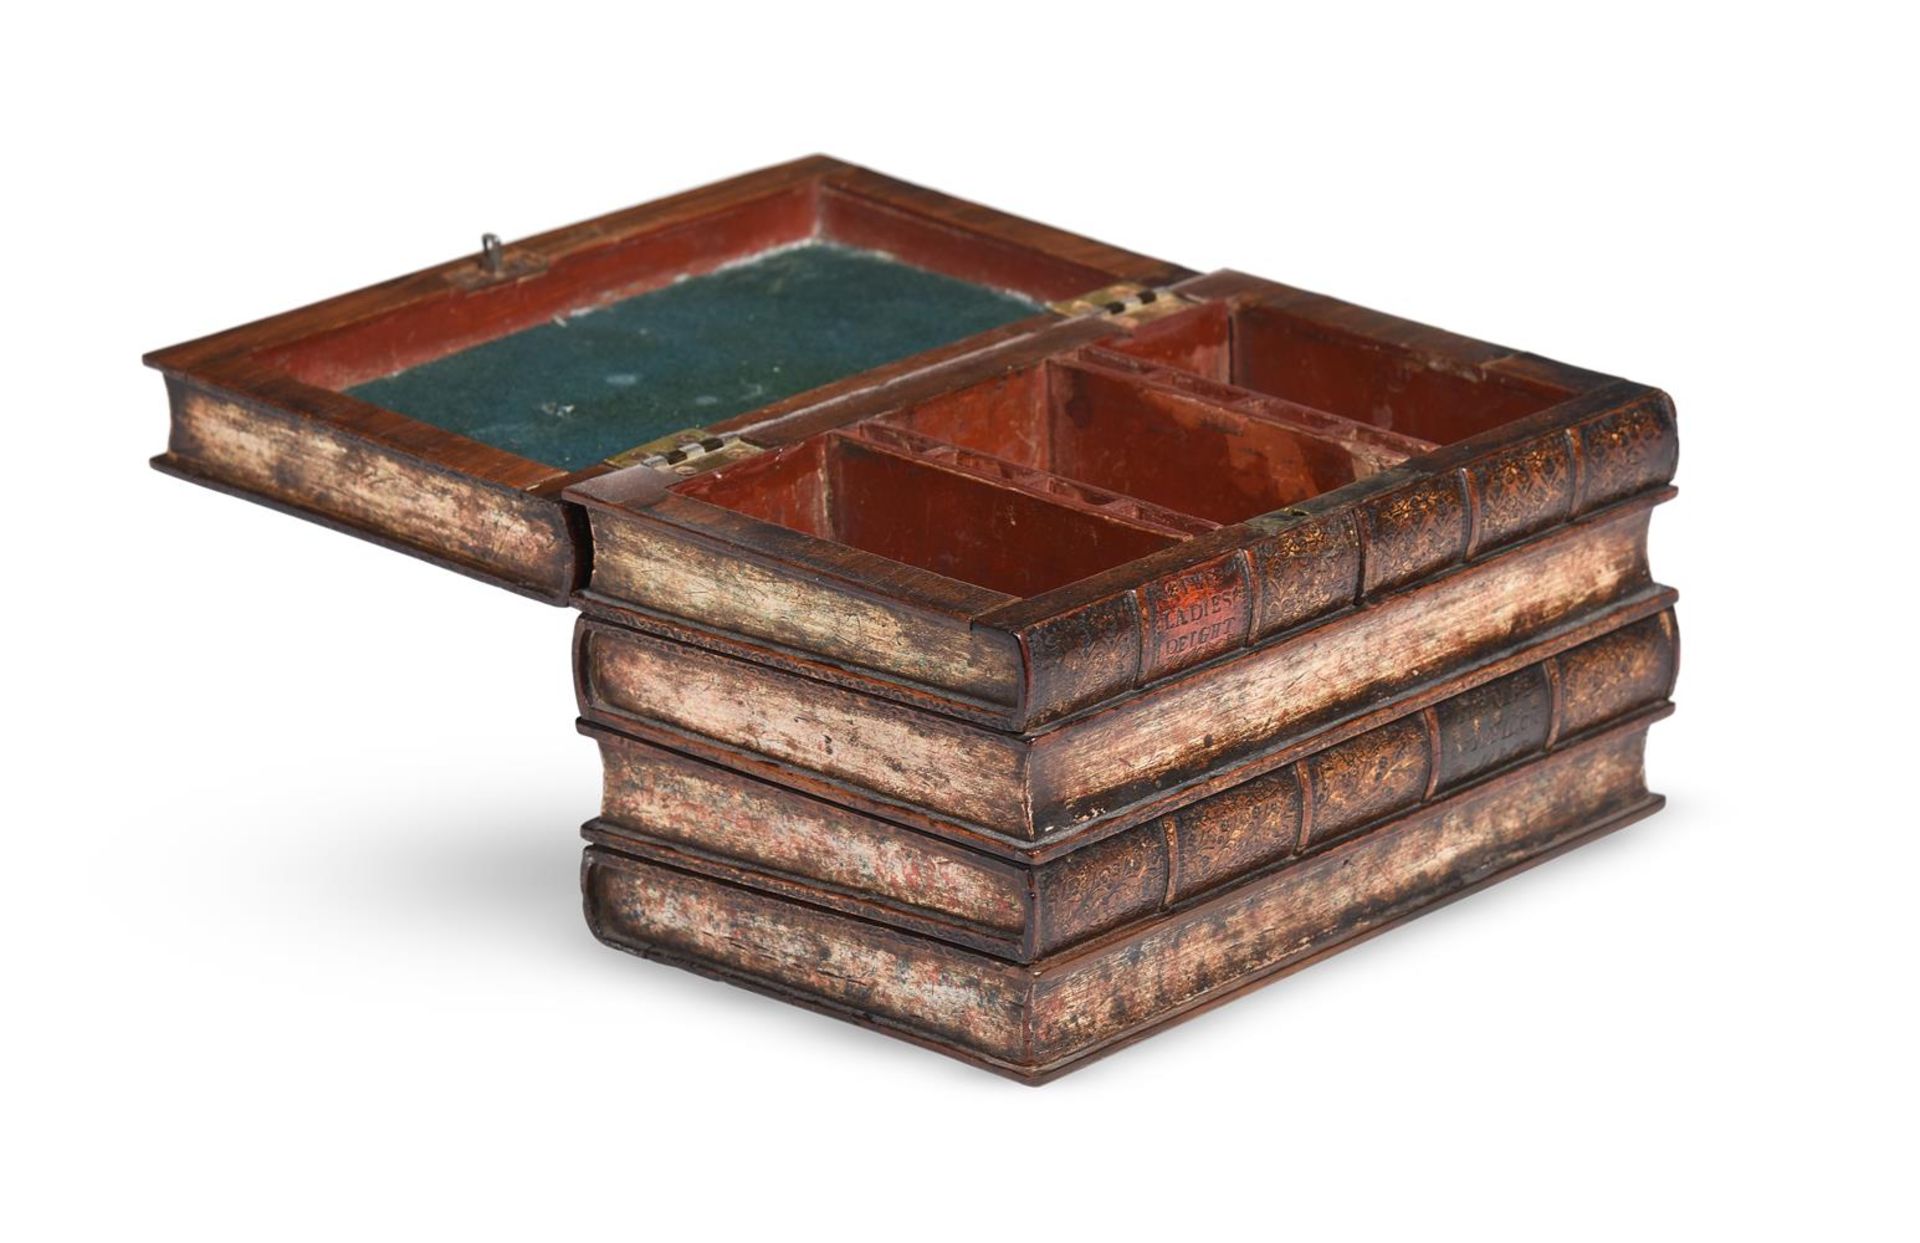 A GEORGE III WALNUT NOVELTY TEA CADDY IN THE FORM OF A STACK OF BOOKS, LATE 18TH/ EARLY 19TH CENTURY - Bild 2 aus 3